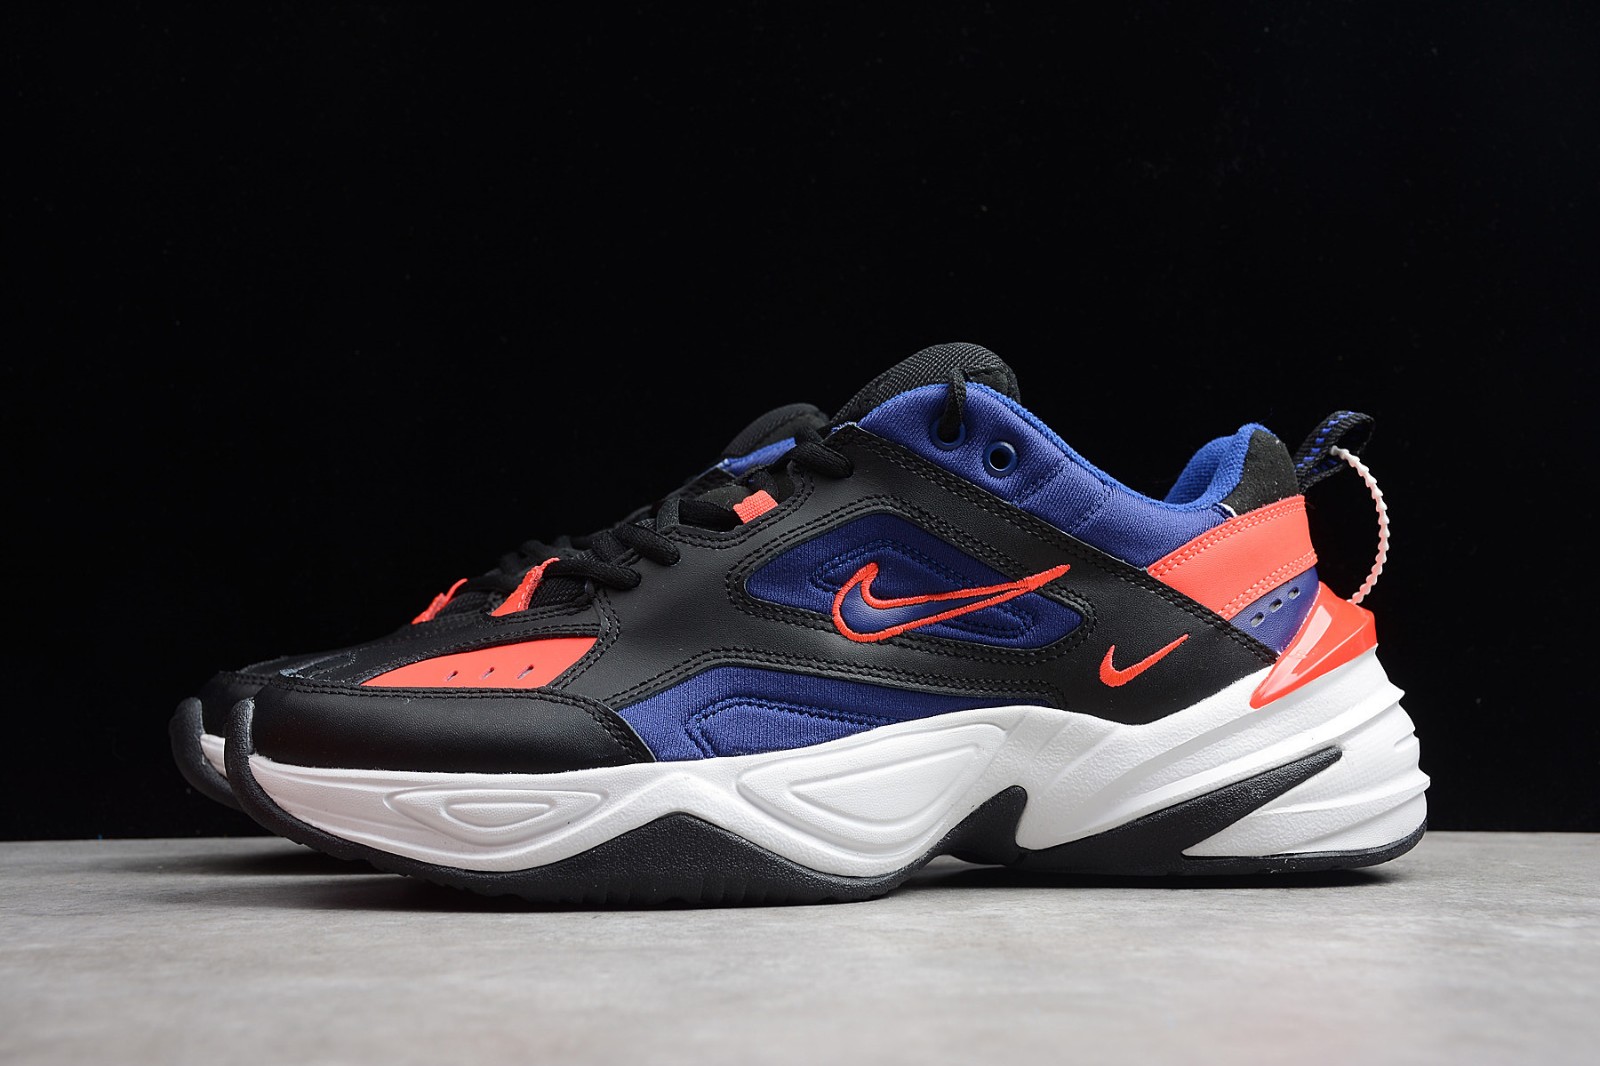 solidariteit matchmaker zout MultiscaleconsultingShops - Nike M2K Tekno Black Racer Blue Red White  AV4789 - 006 - nike free trainer tennessee 2018 football schedule